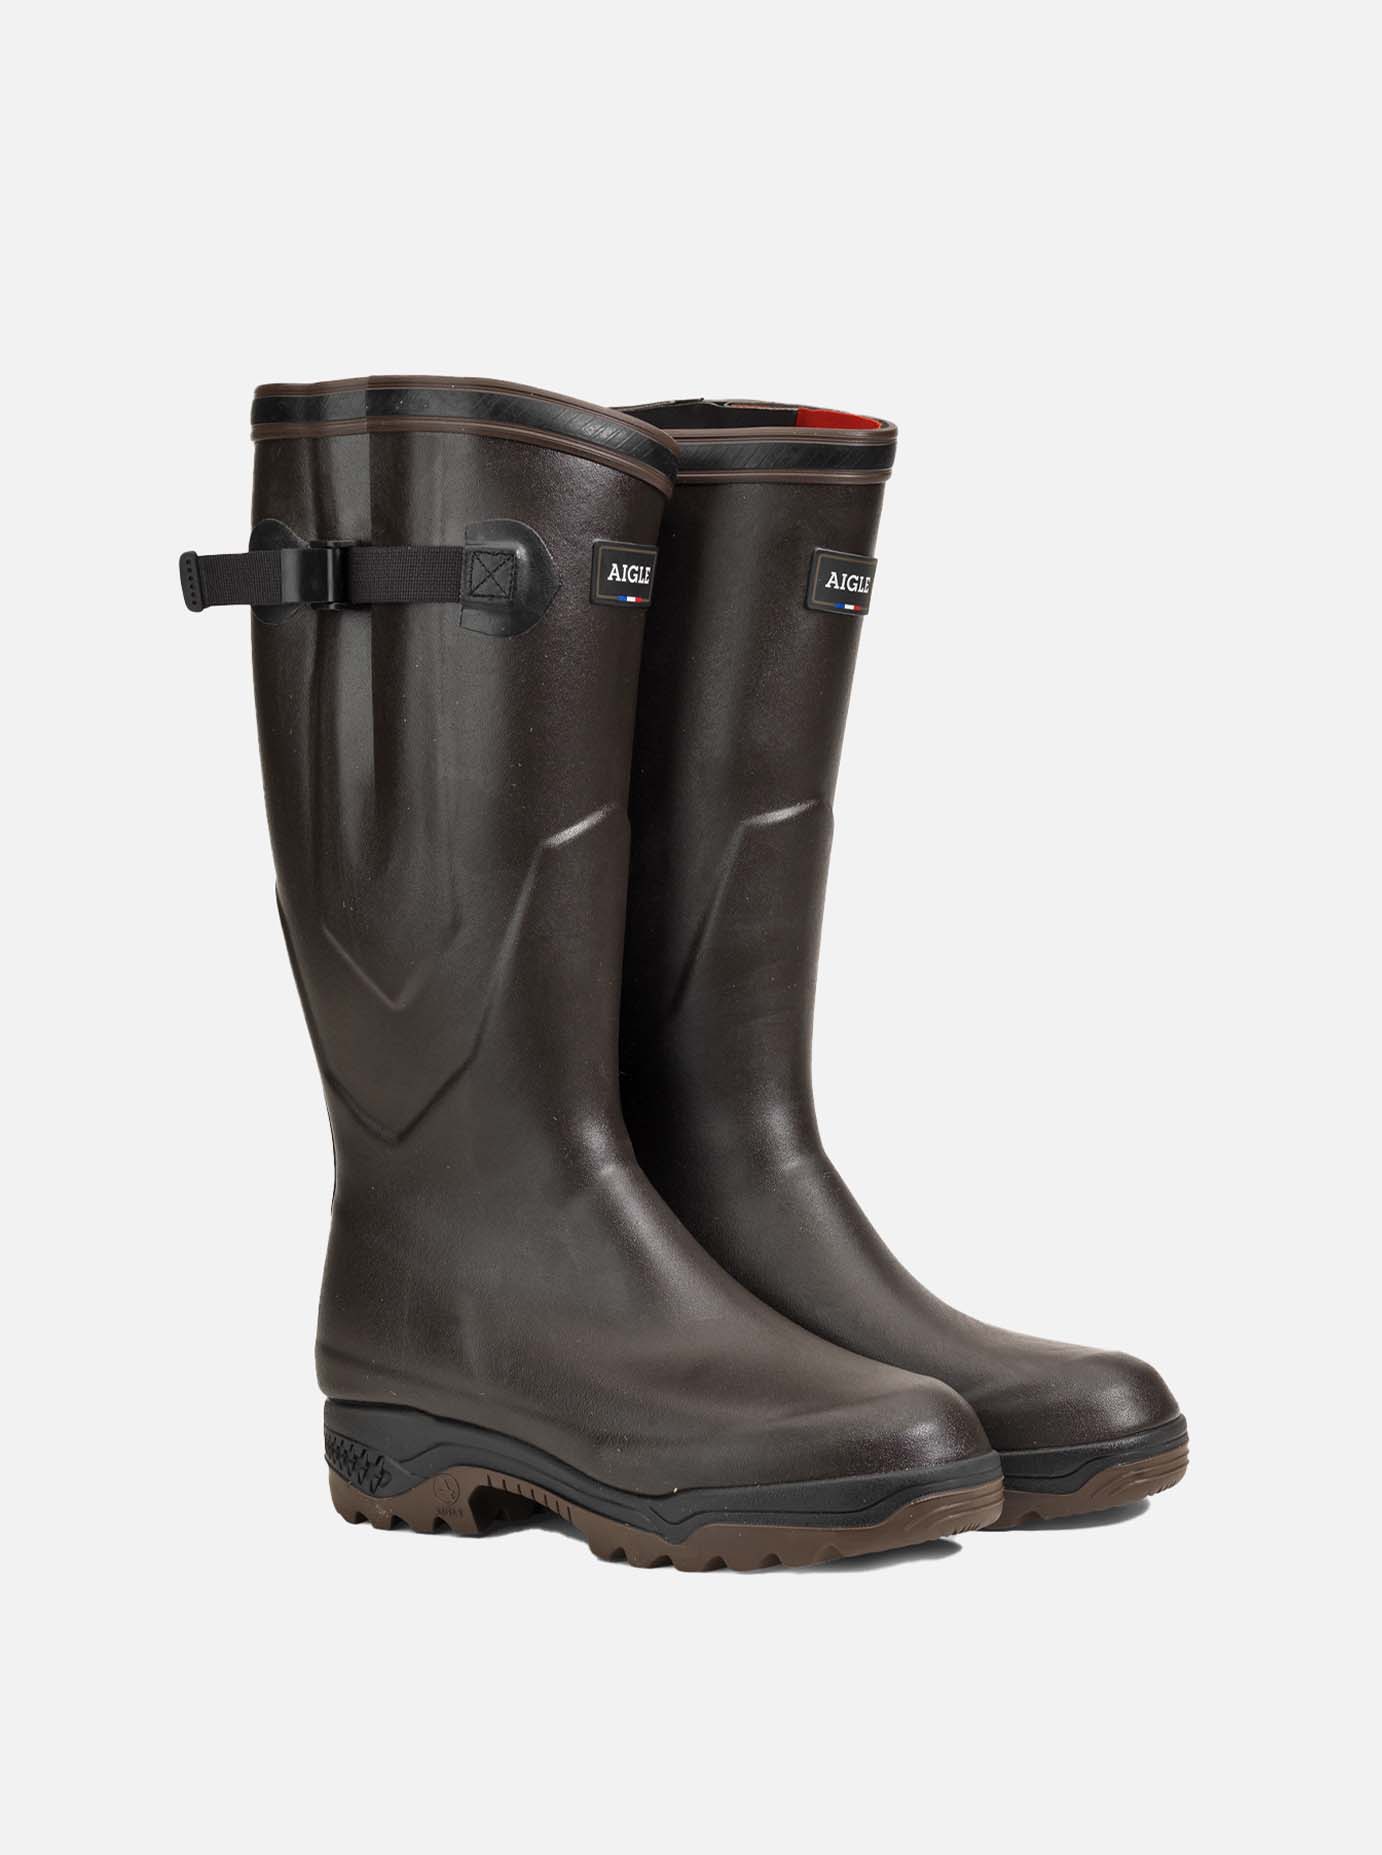 Morgen læber fortjener Aigle - Anti-fatigue boots for cold weather, Made in France Brun - Parcours®  2 iso | AIGLE